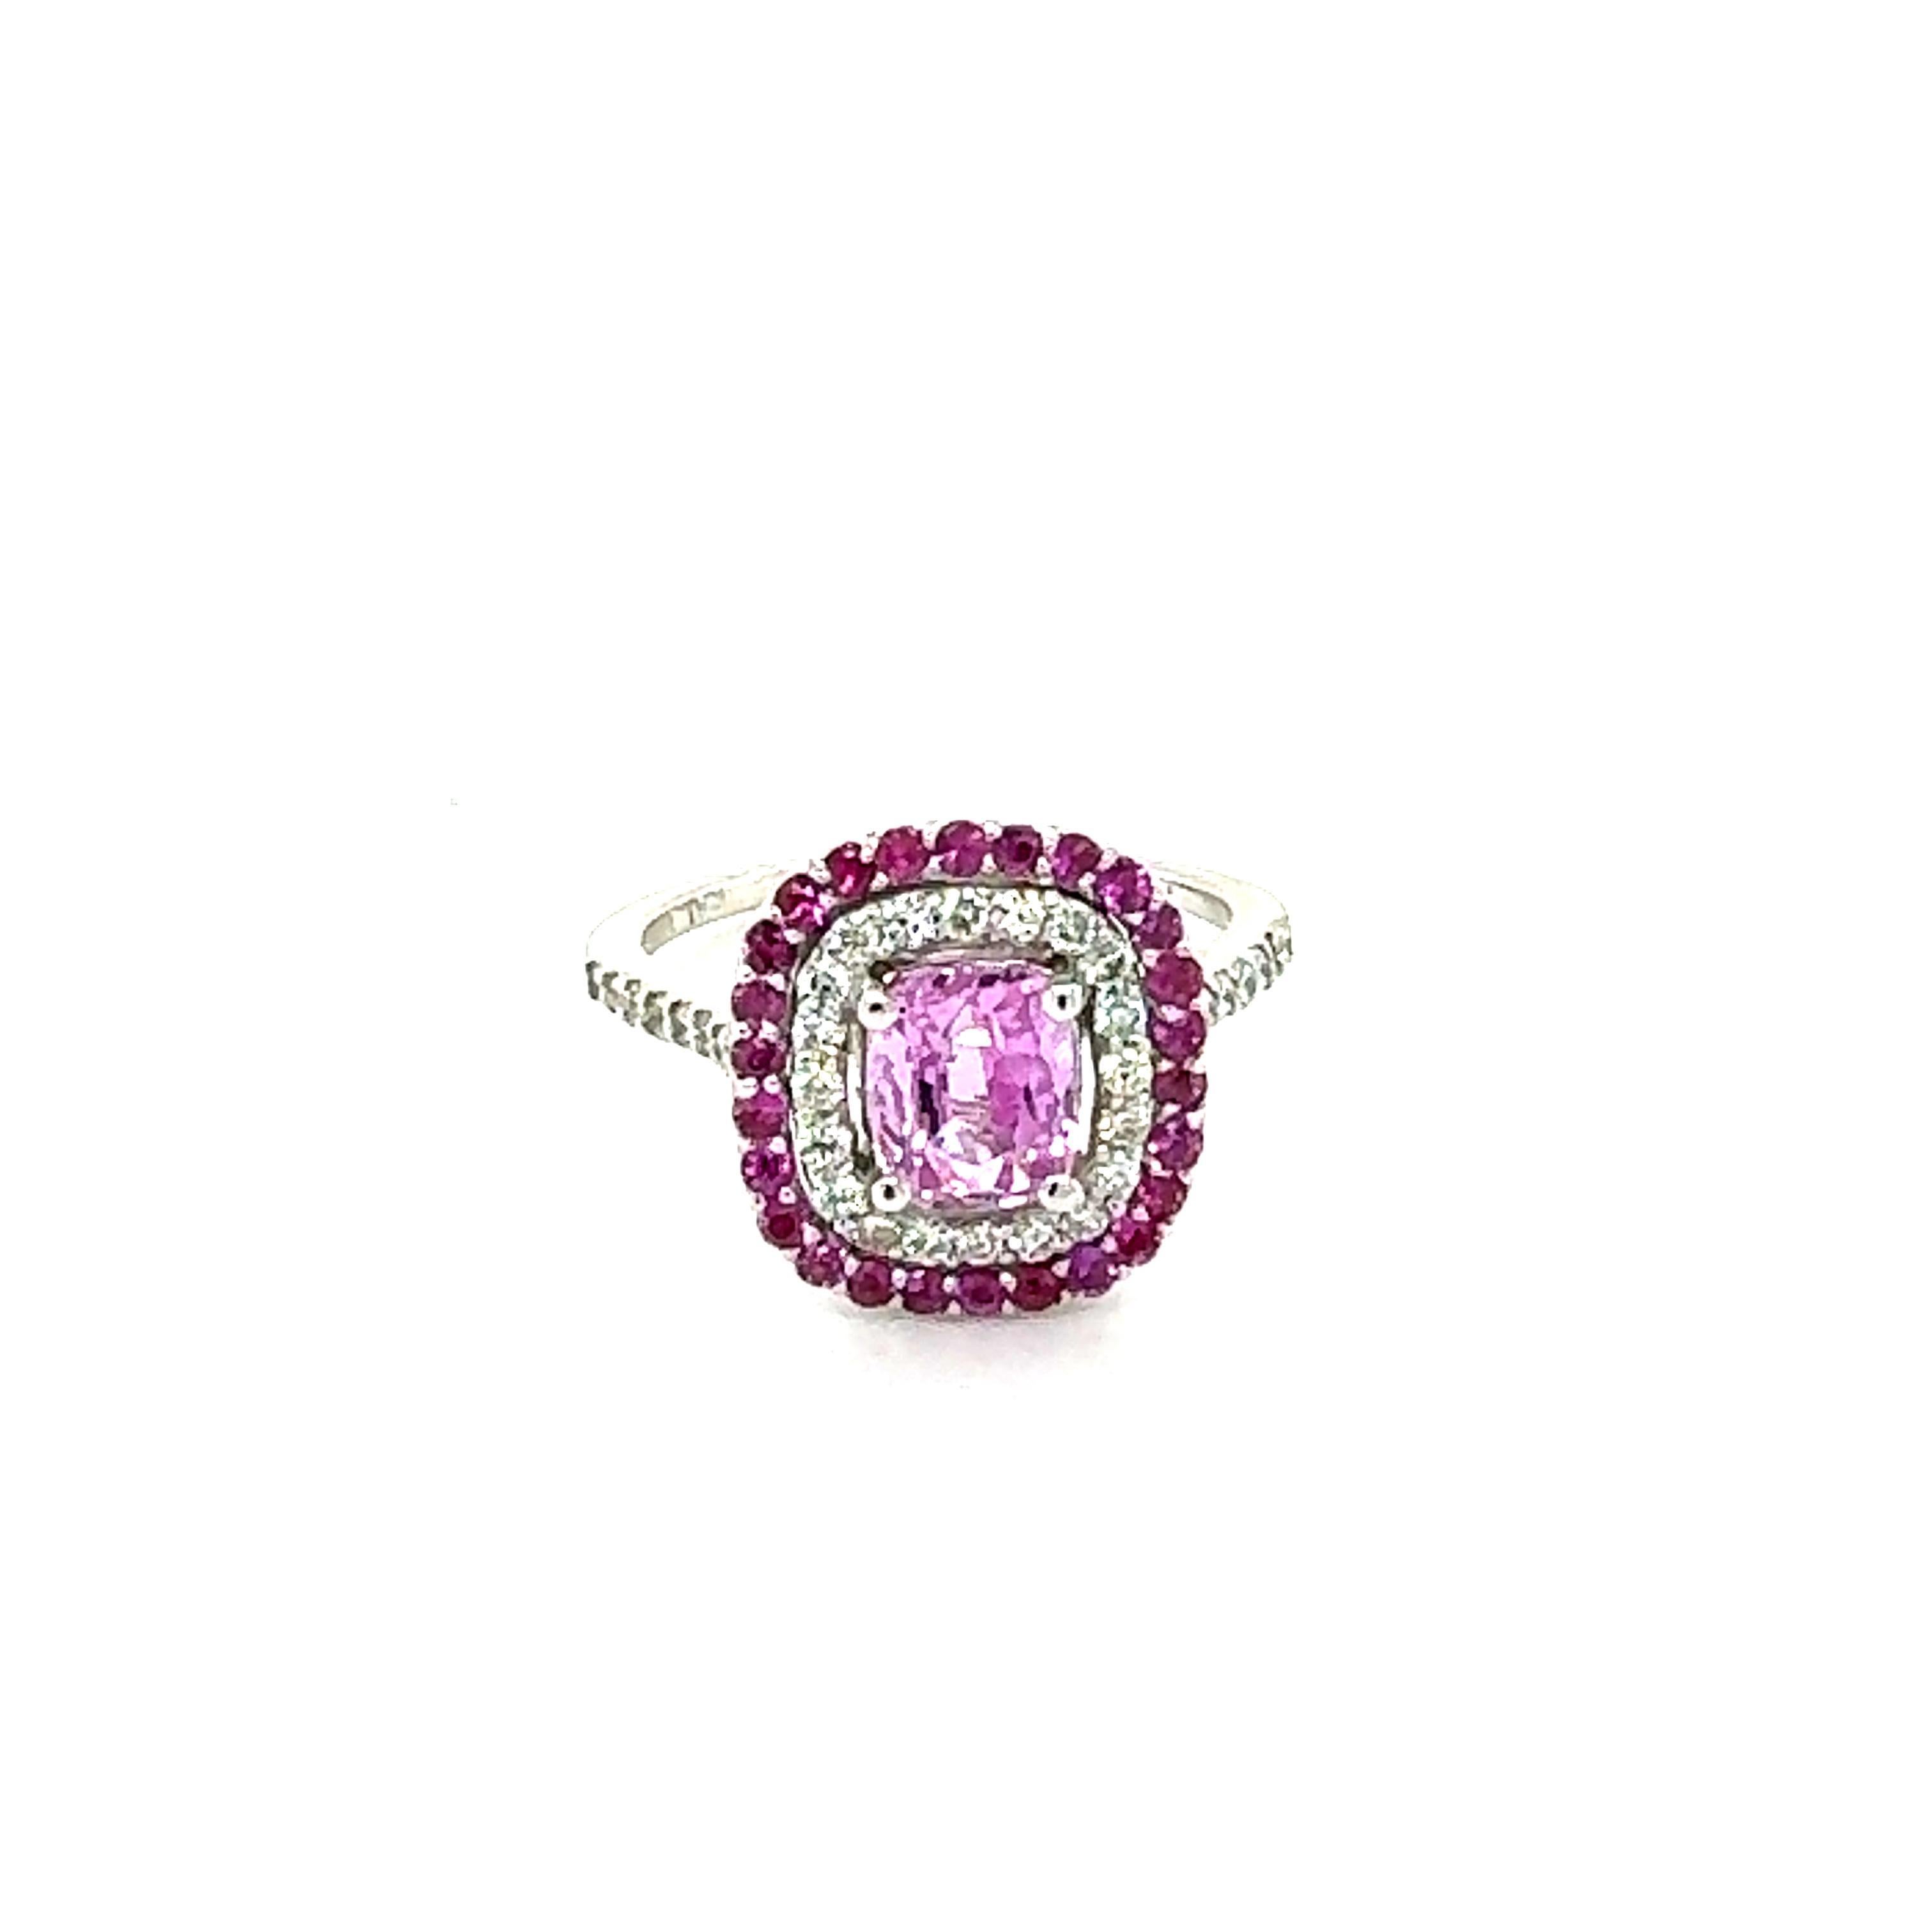 Women's GIA Certified 2.32 Carat Cushion Cut Pink Sapphire Diamond White Gold Ring For Sale